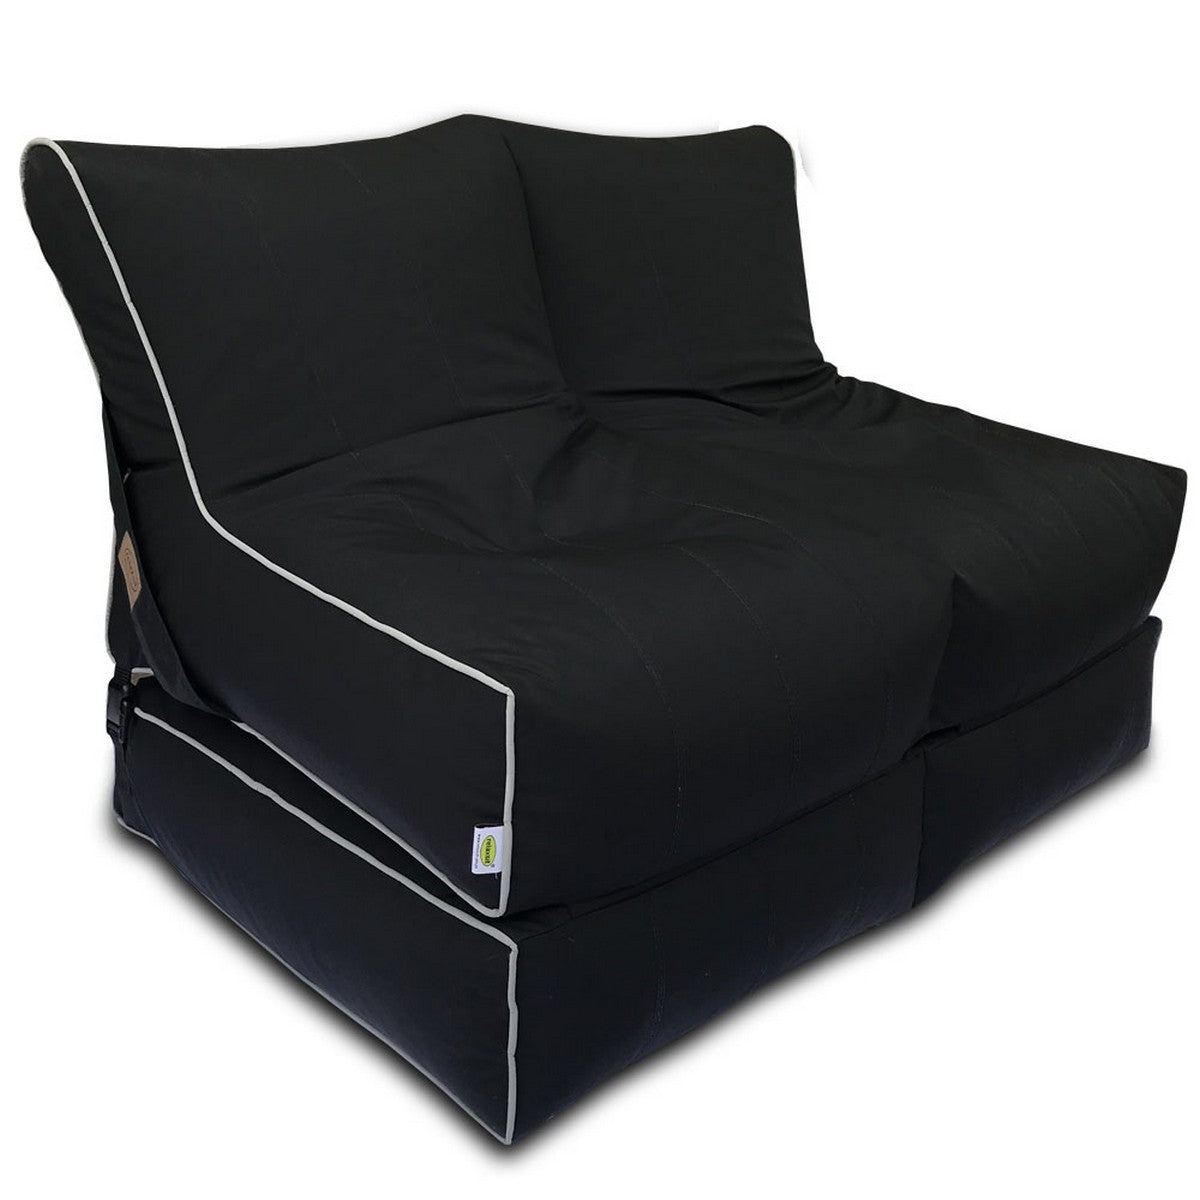 Couples Wallow Flip-Out Lounger